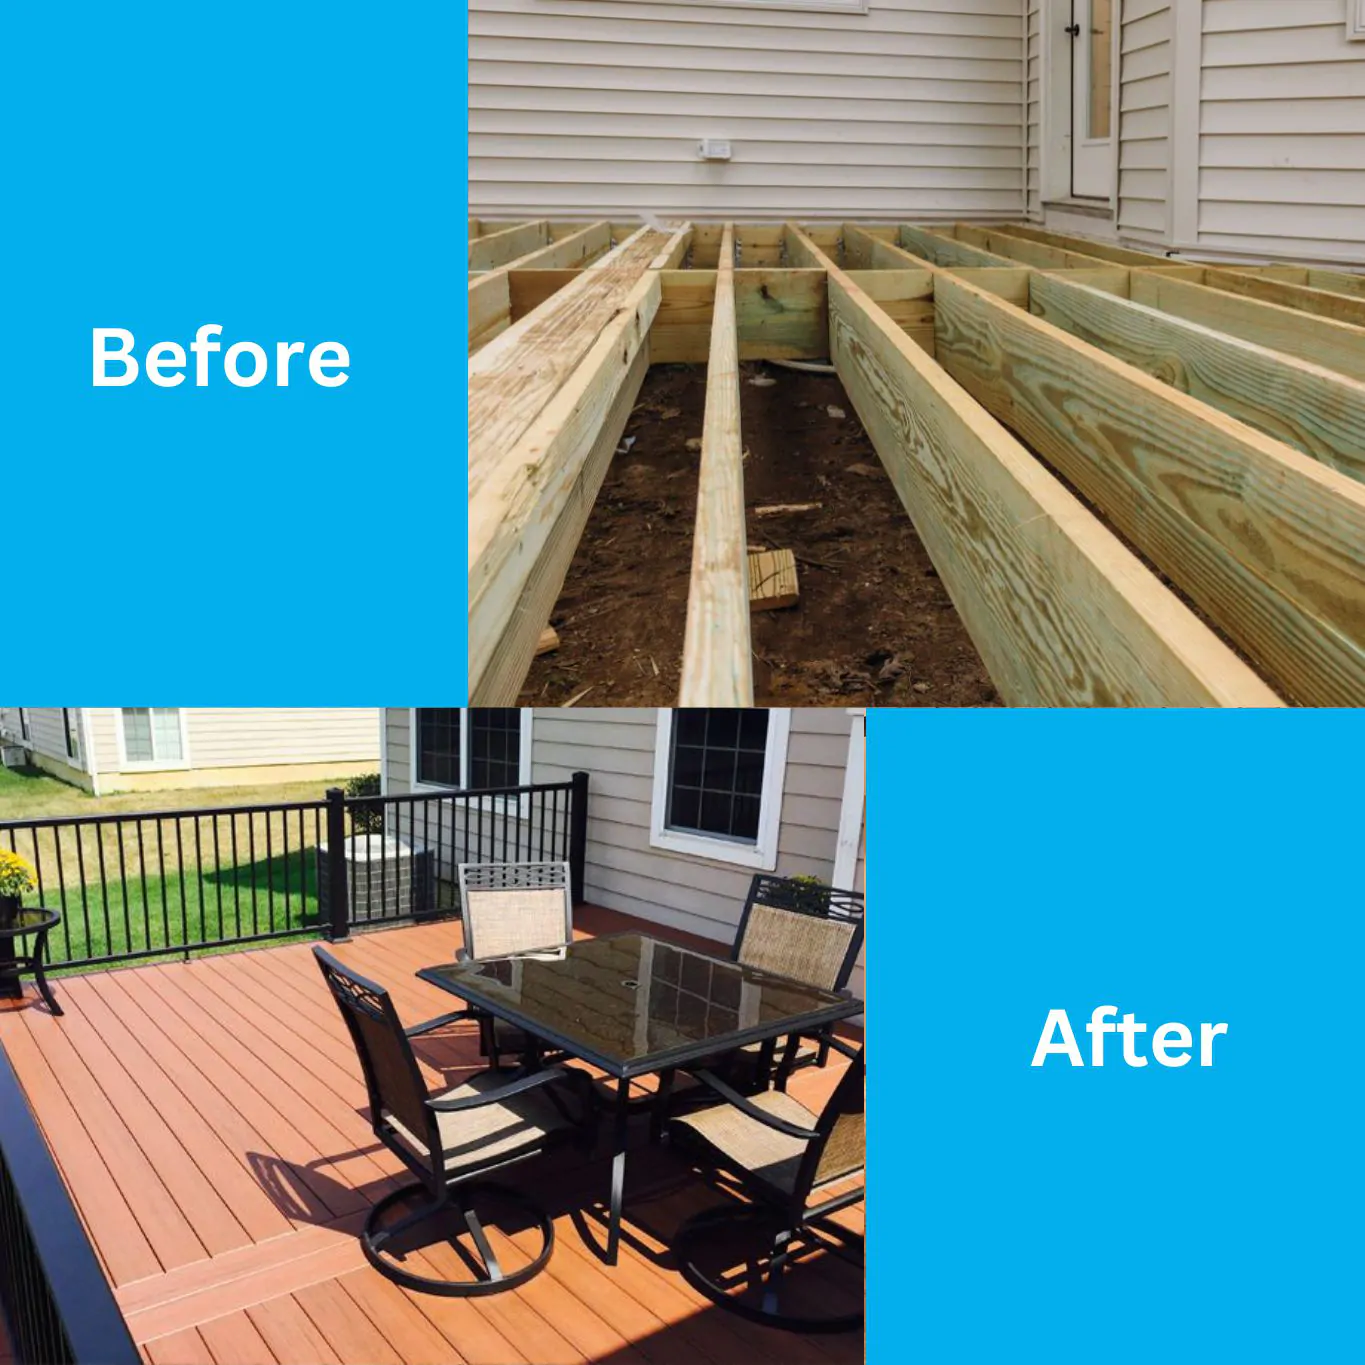 Before and After Deck Installation Services - All Pro Cape May Deck Builders